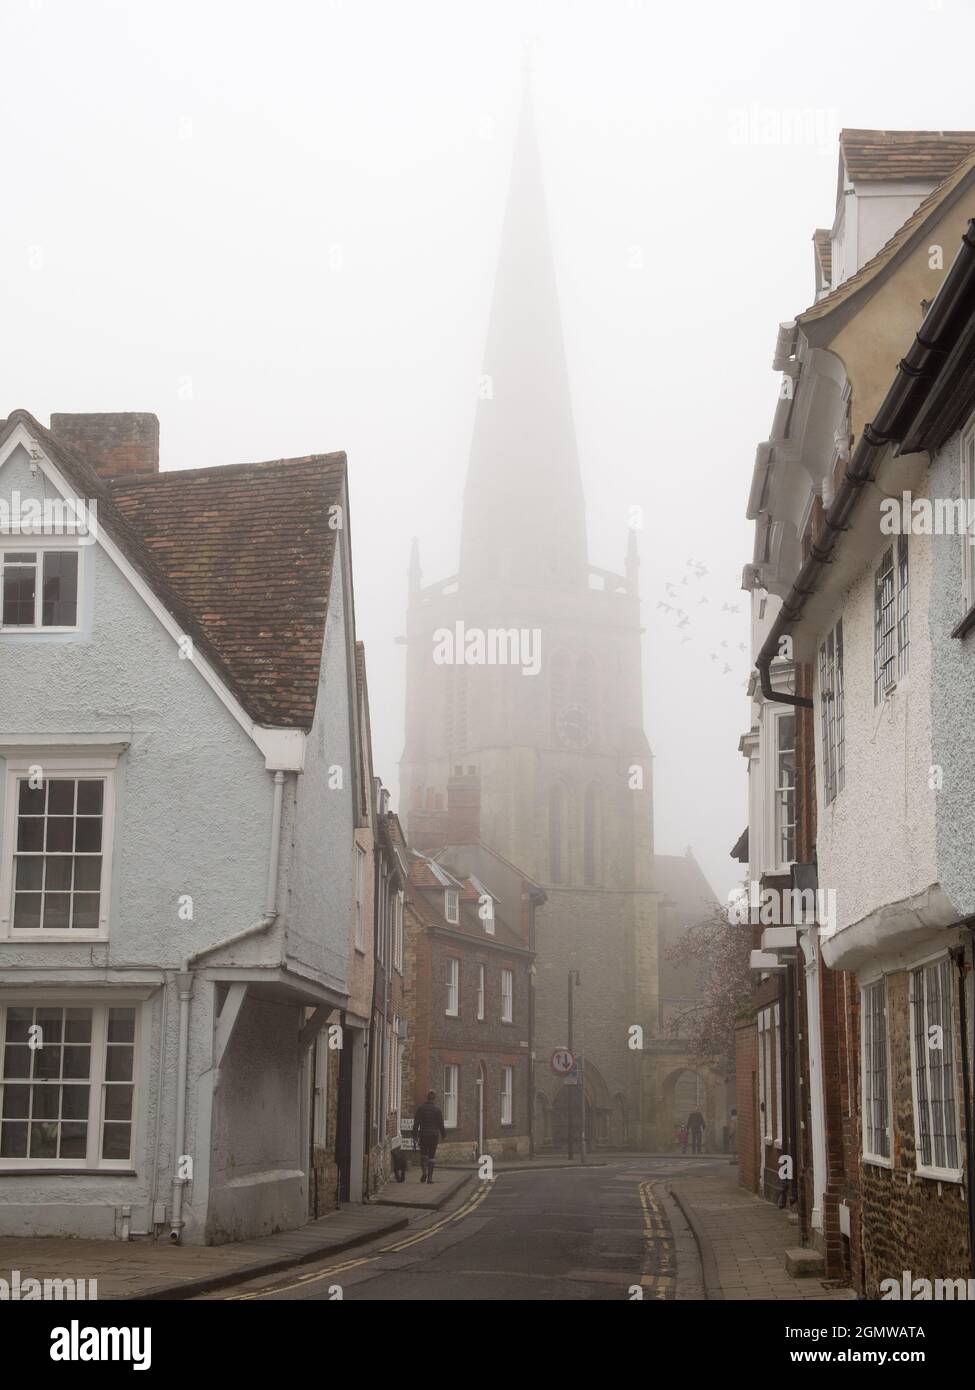 Shown here, St Helens Road leads from Abingdon town centre, England, to St Helens Church (with the obscured spire) and St Helens Wharf by the Thames. Stock Photo